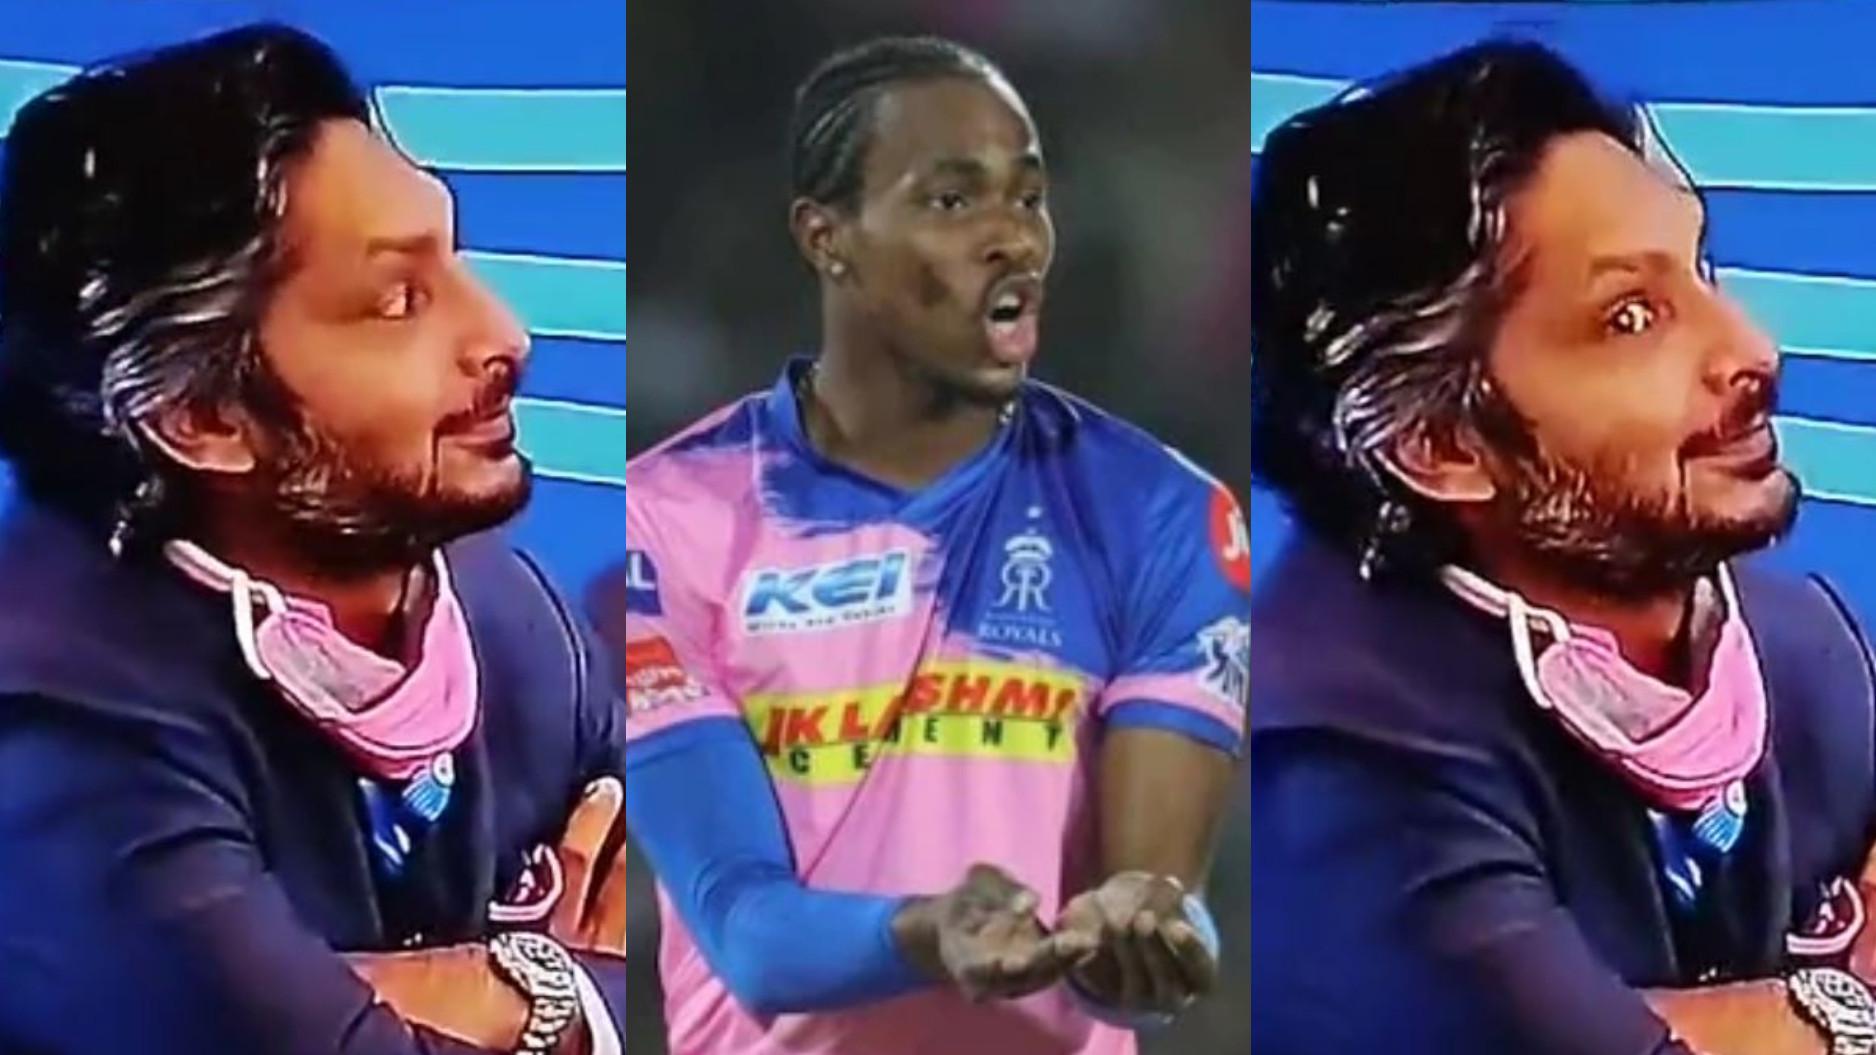 IPL 2022 Auction: WATCH- RR’s Kumar Sangakkara cheekily tries to convince other teams to bid for Jofra Archer